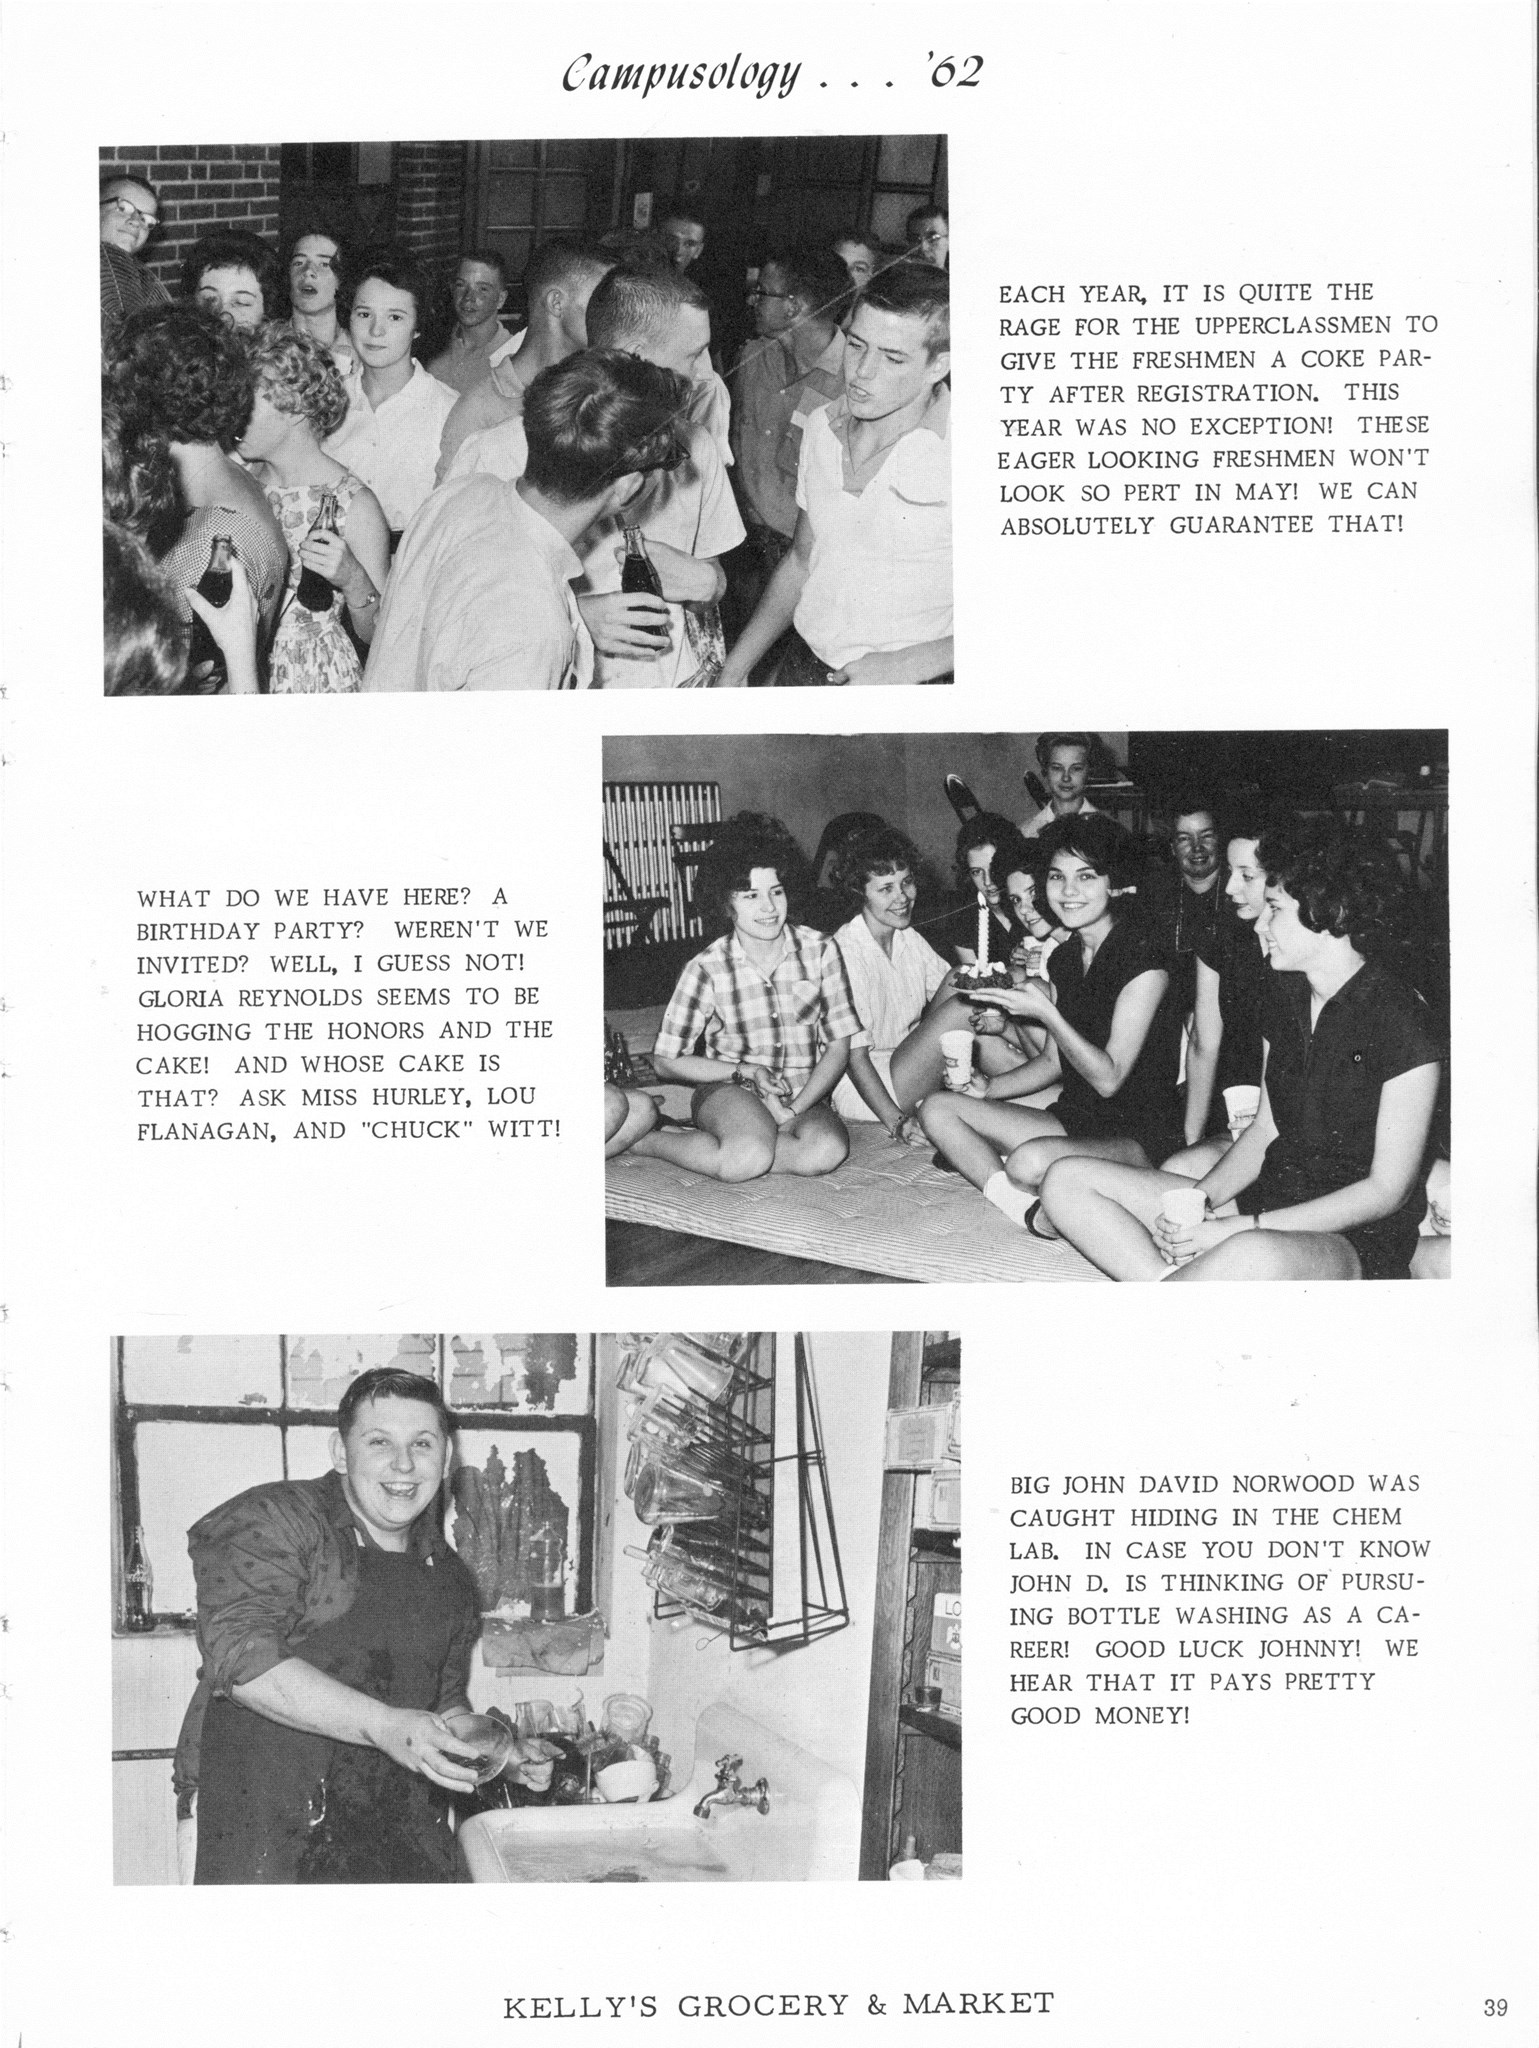 ../../../Images/Large/1962/Arclight-1962-pg0039.jpg